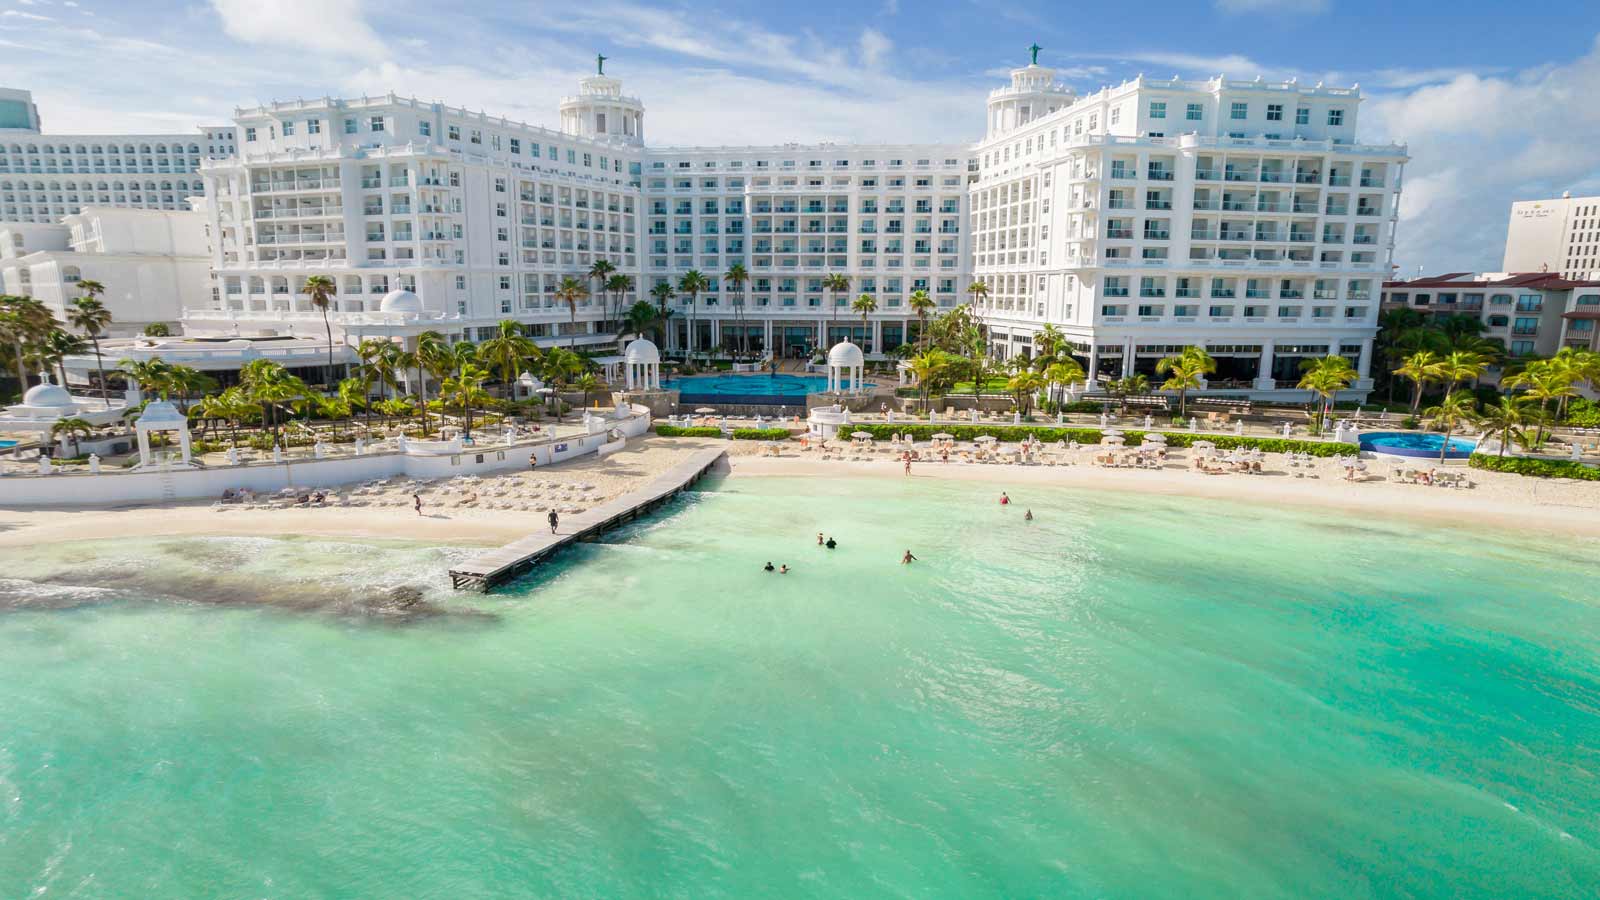 <p><strong>Address:</strong> AV Xaman-Ha Mza 9 Y 10 Lote 1 Fase II, Playacar, 77710 Playa del Carmen, Q.R., Mexico</p><p>Riu Palace Riviera Maya is situated on a beautiful beach in Playa del Carmen. Enjoy all-inclusive 24-hour service, free Wi-Fi, an incredible gastronomic experience, and exciting entertainment programs.</p>